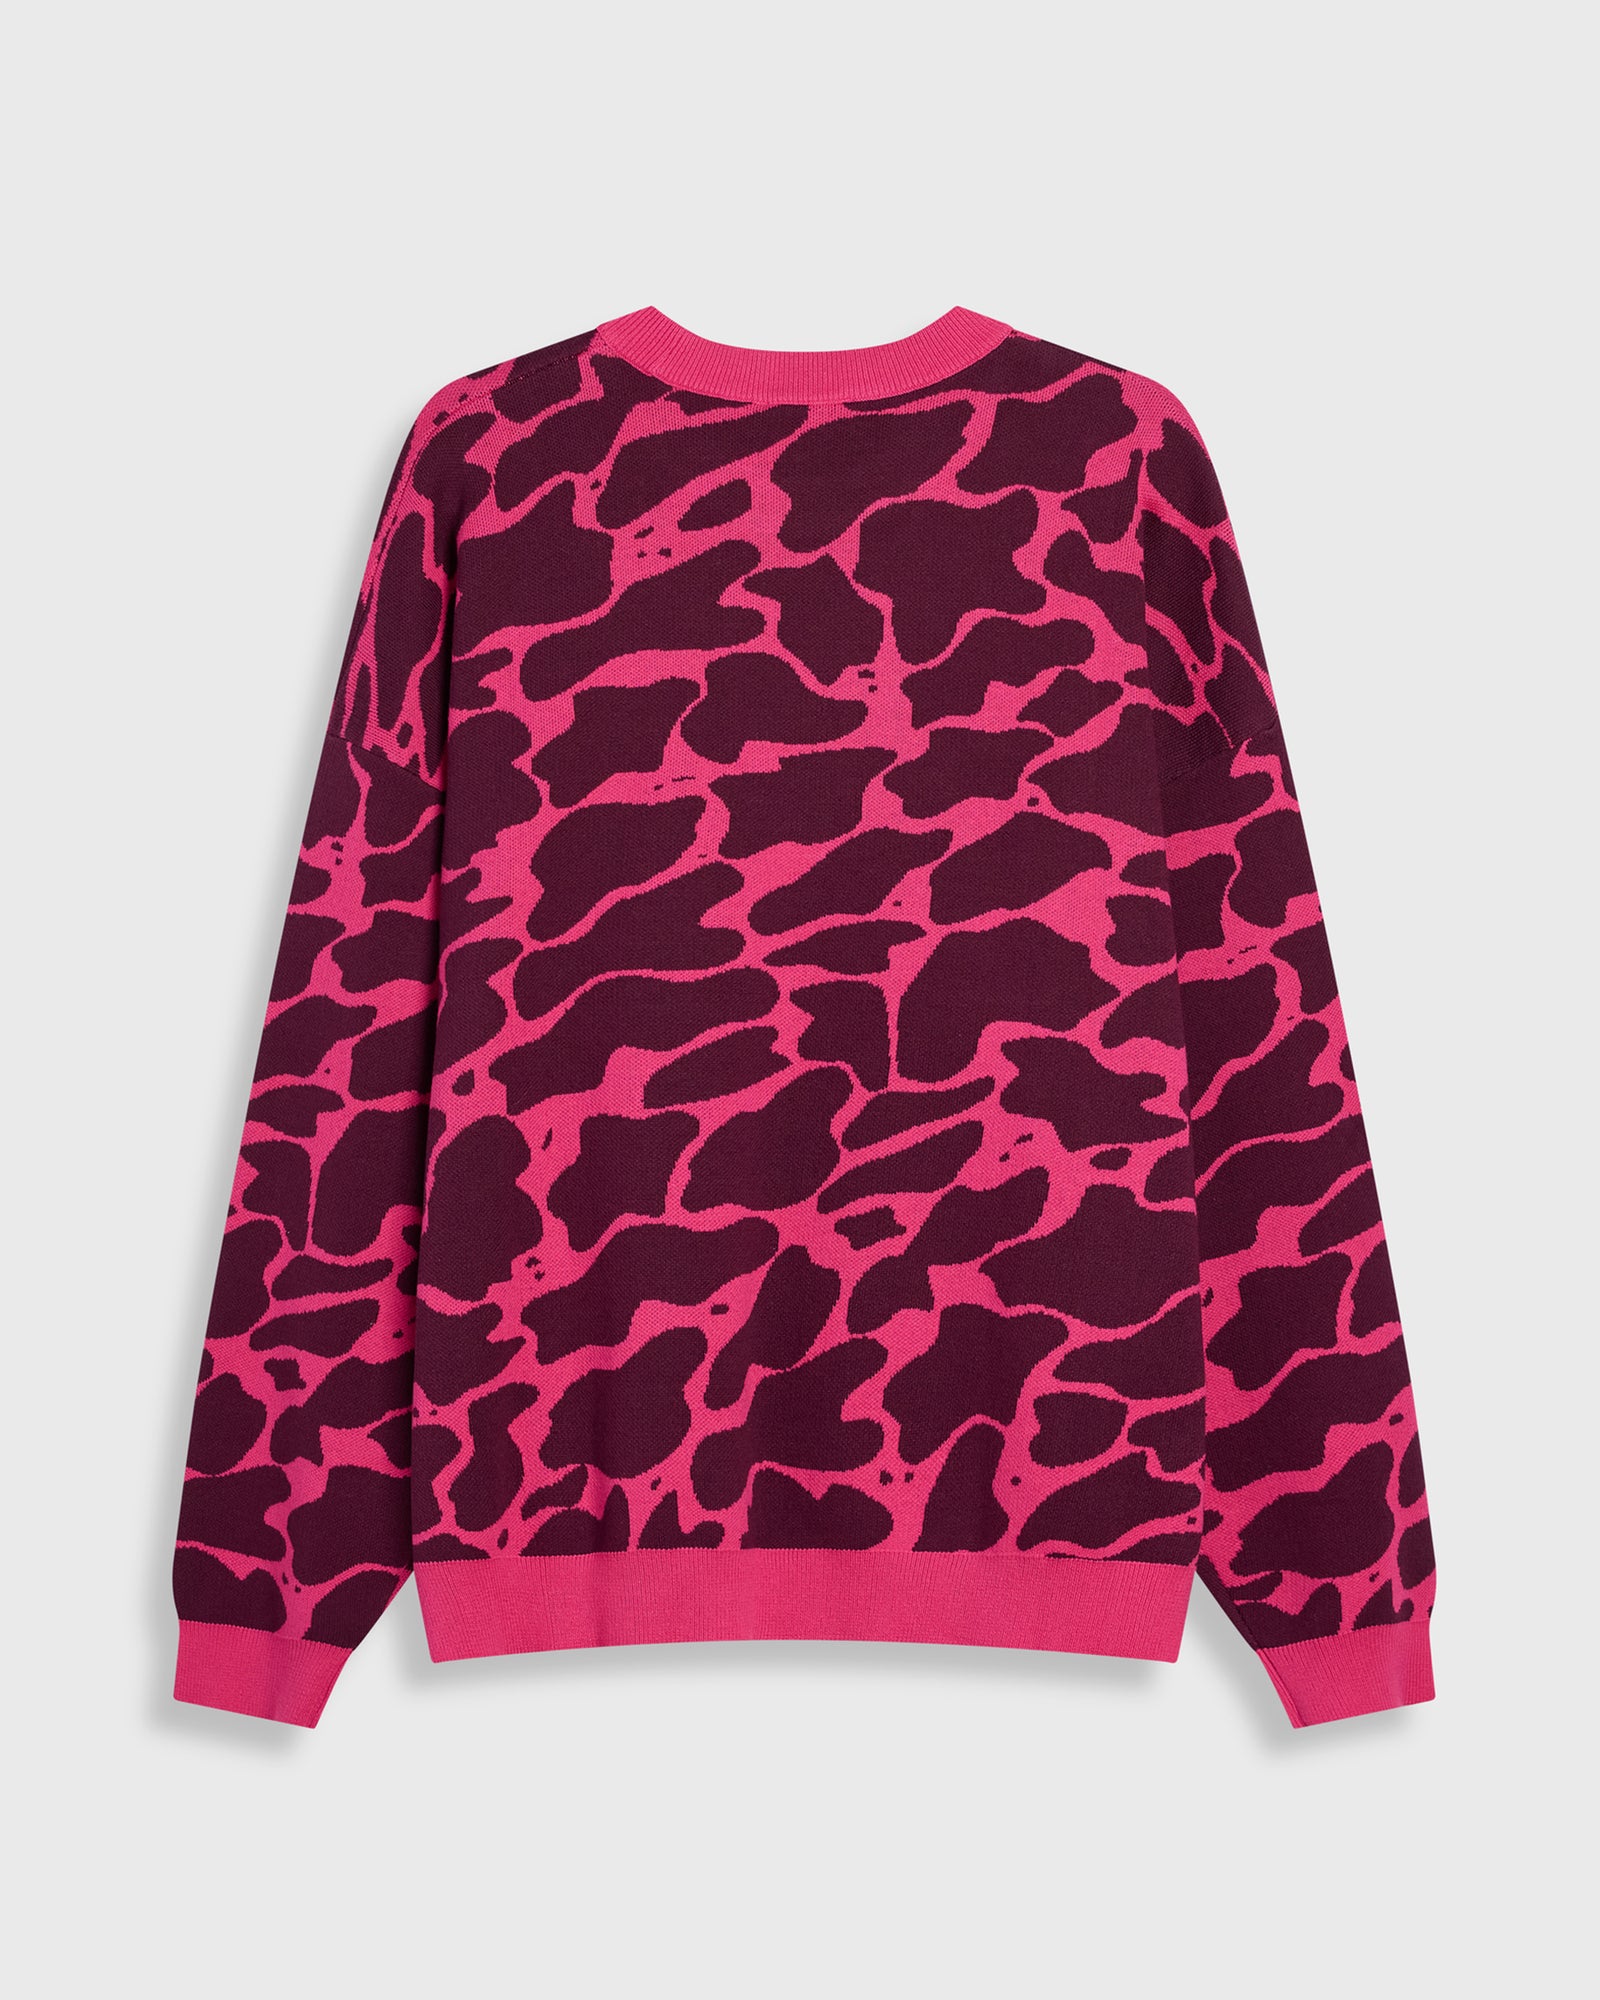 Unique brown print hot pink long sleeve 100% cotton sweater for men and women